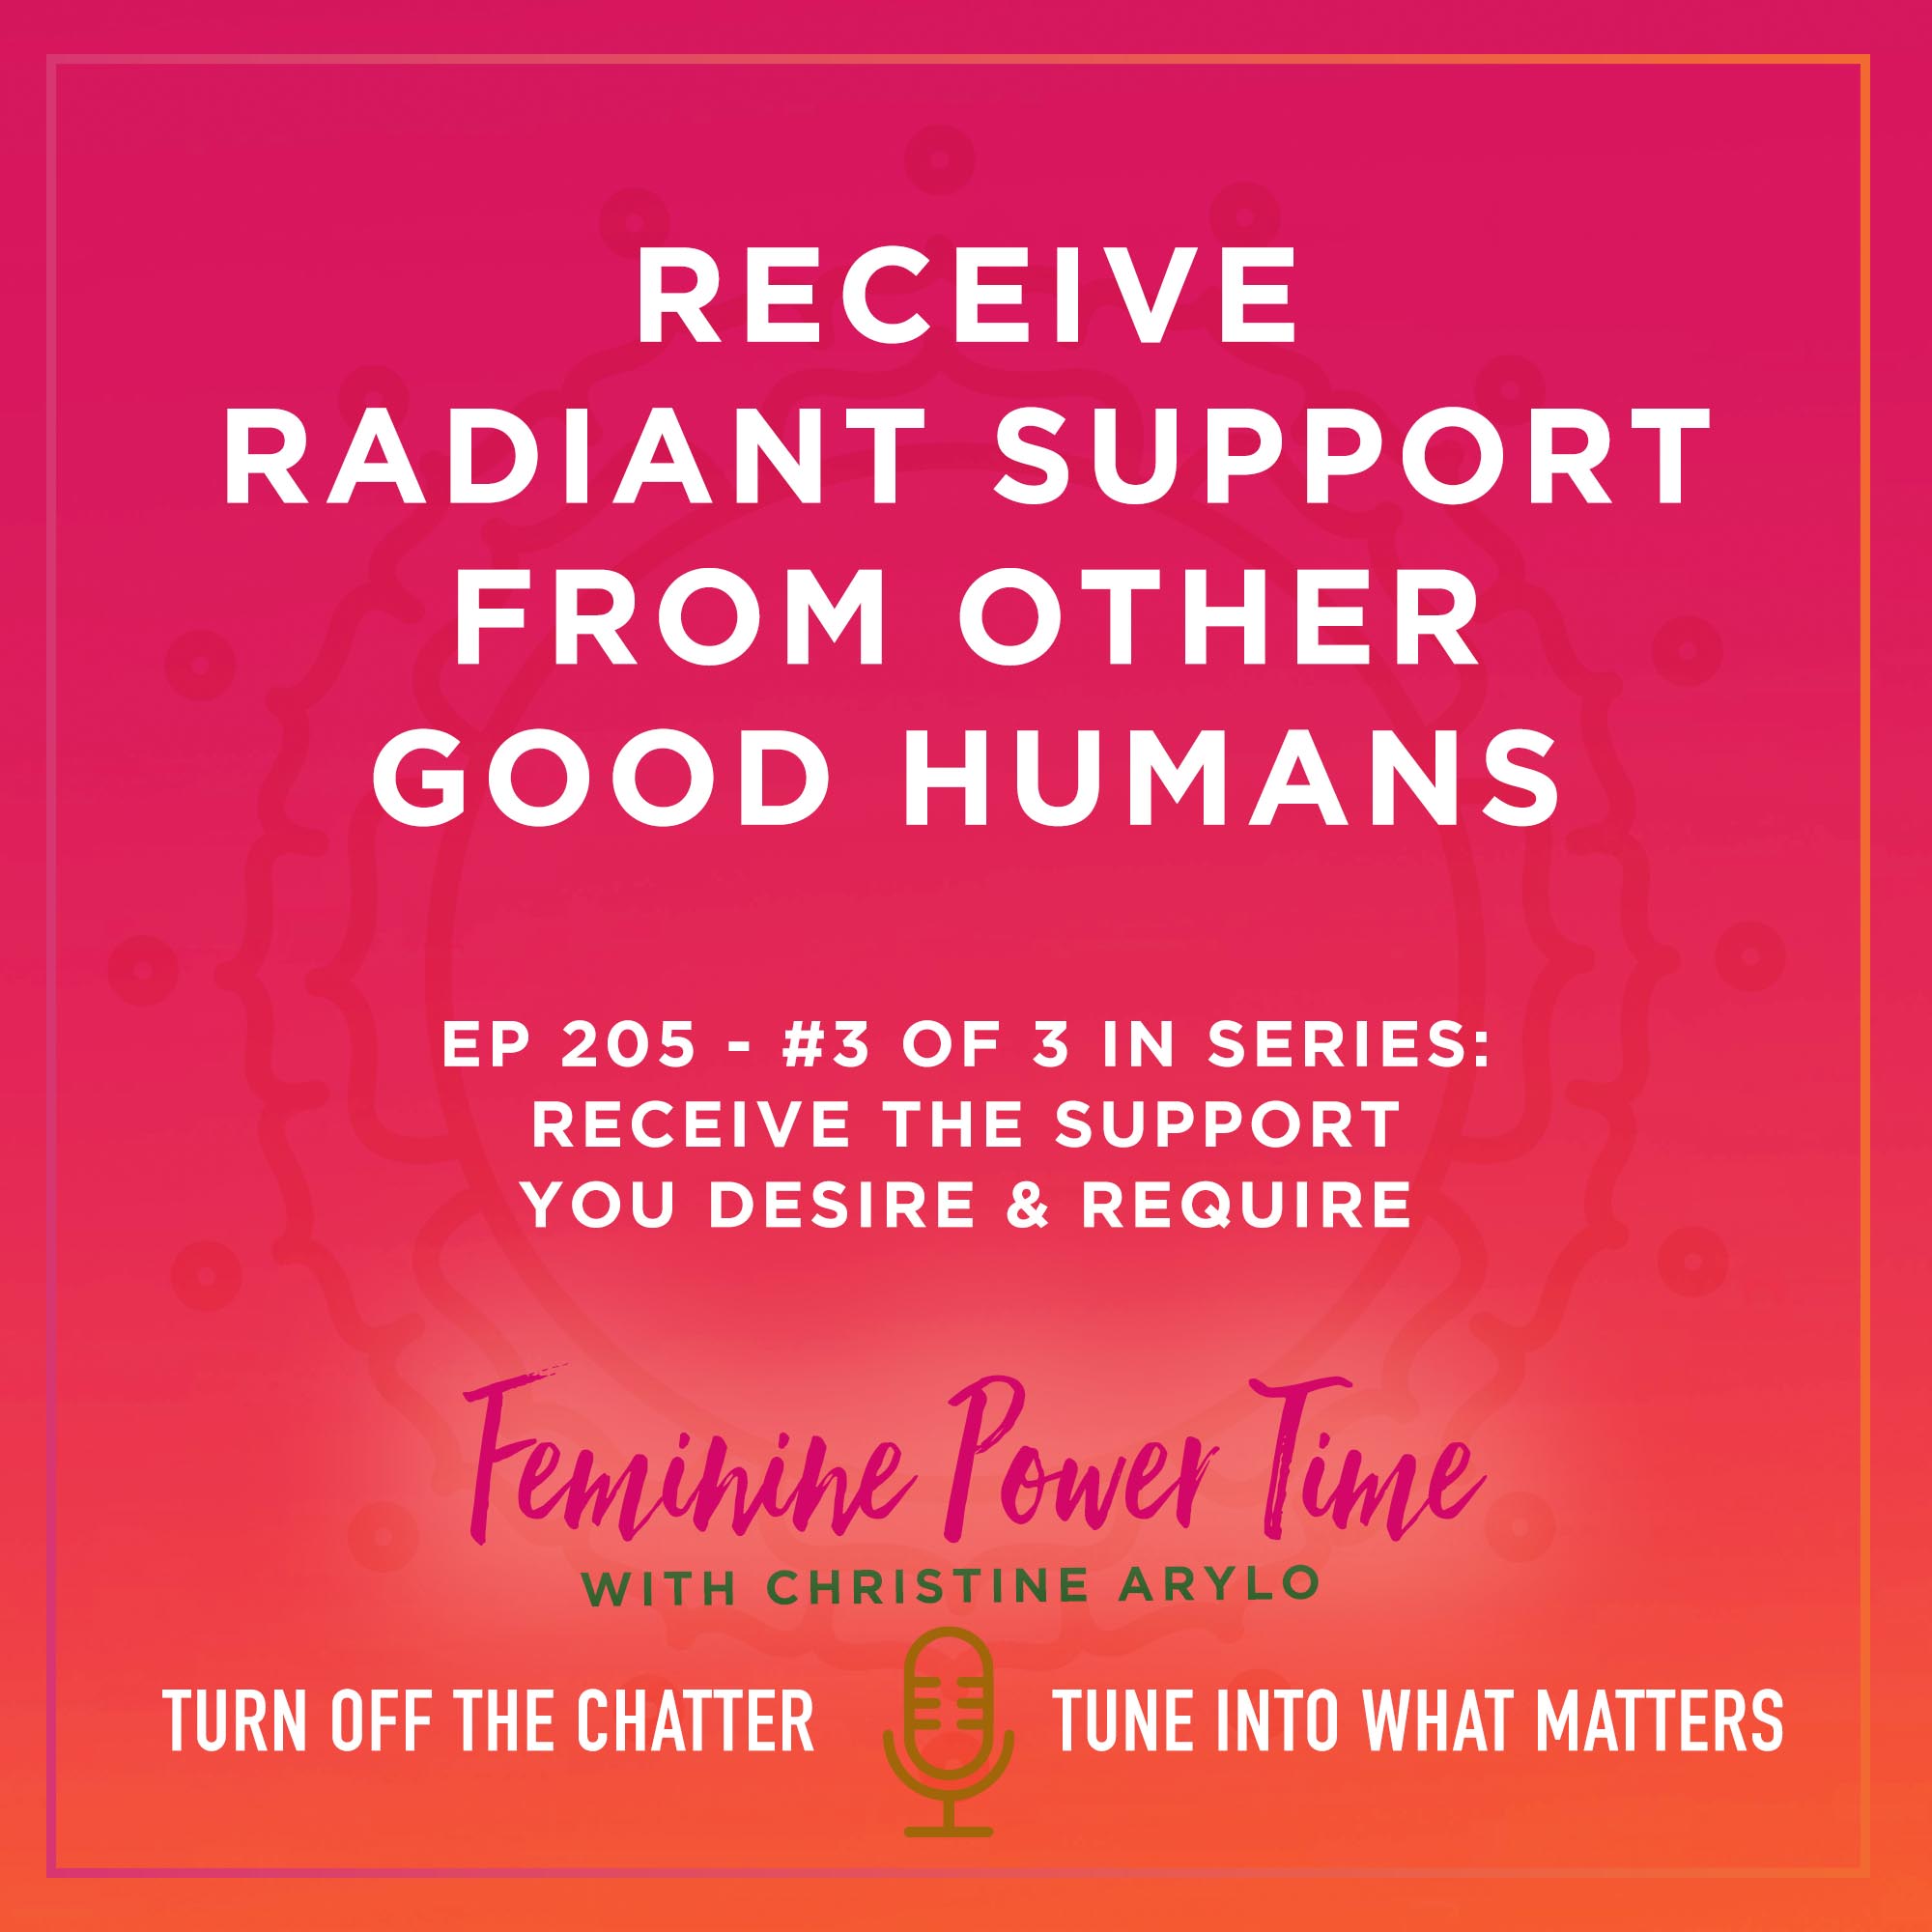 Receive Radiant Support from other Good Humans